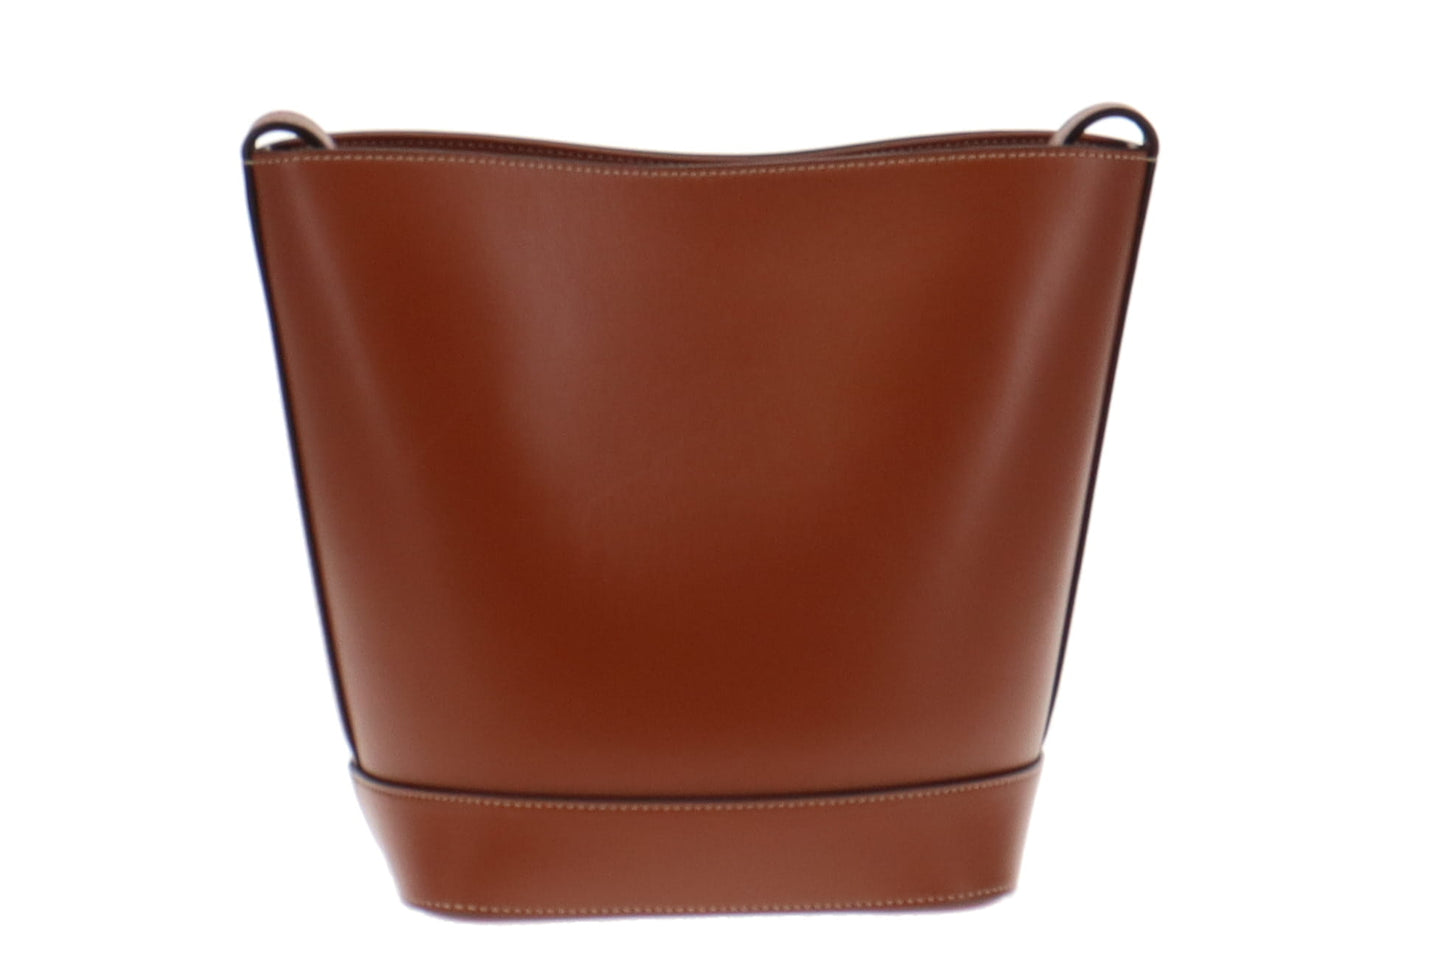 Celine Tan Smooth Leather Small Triomphe Bucket Bag